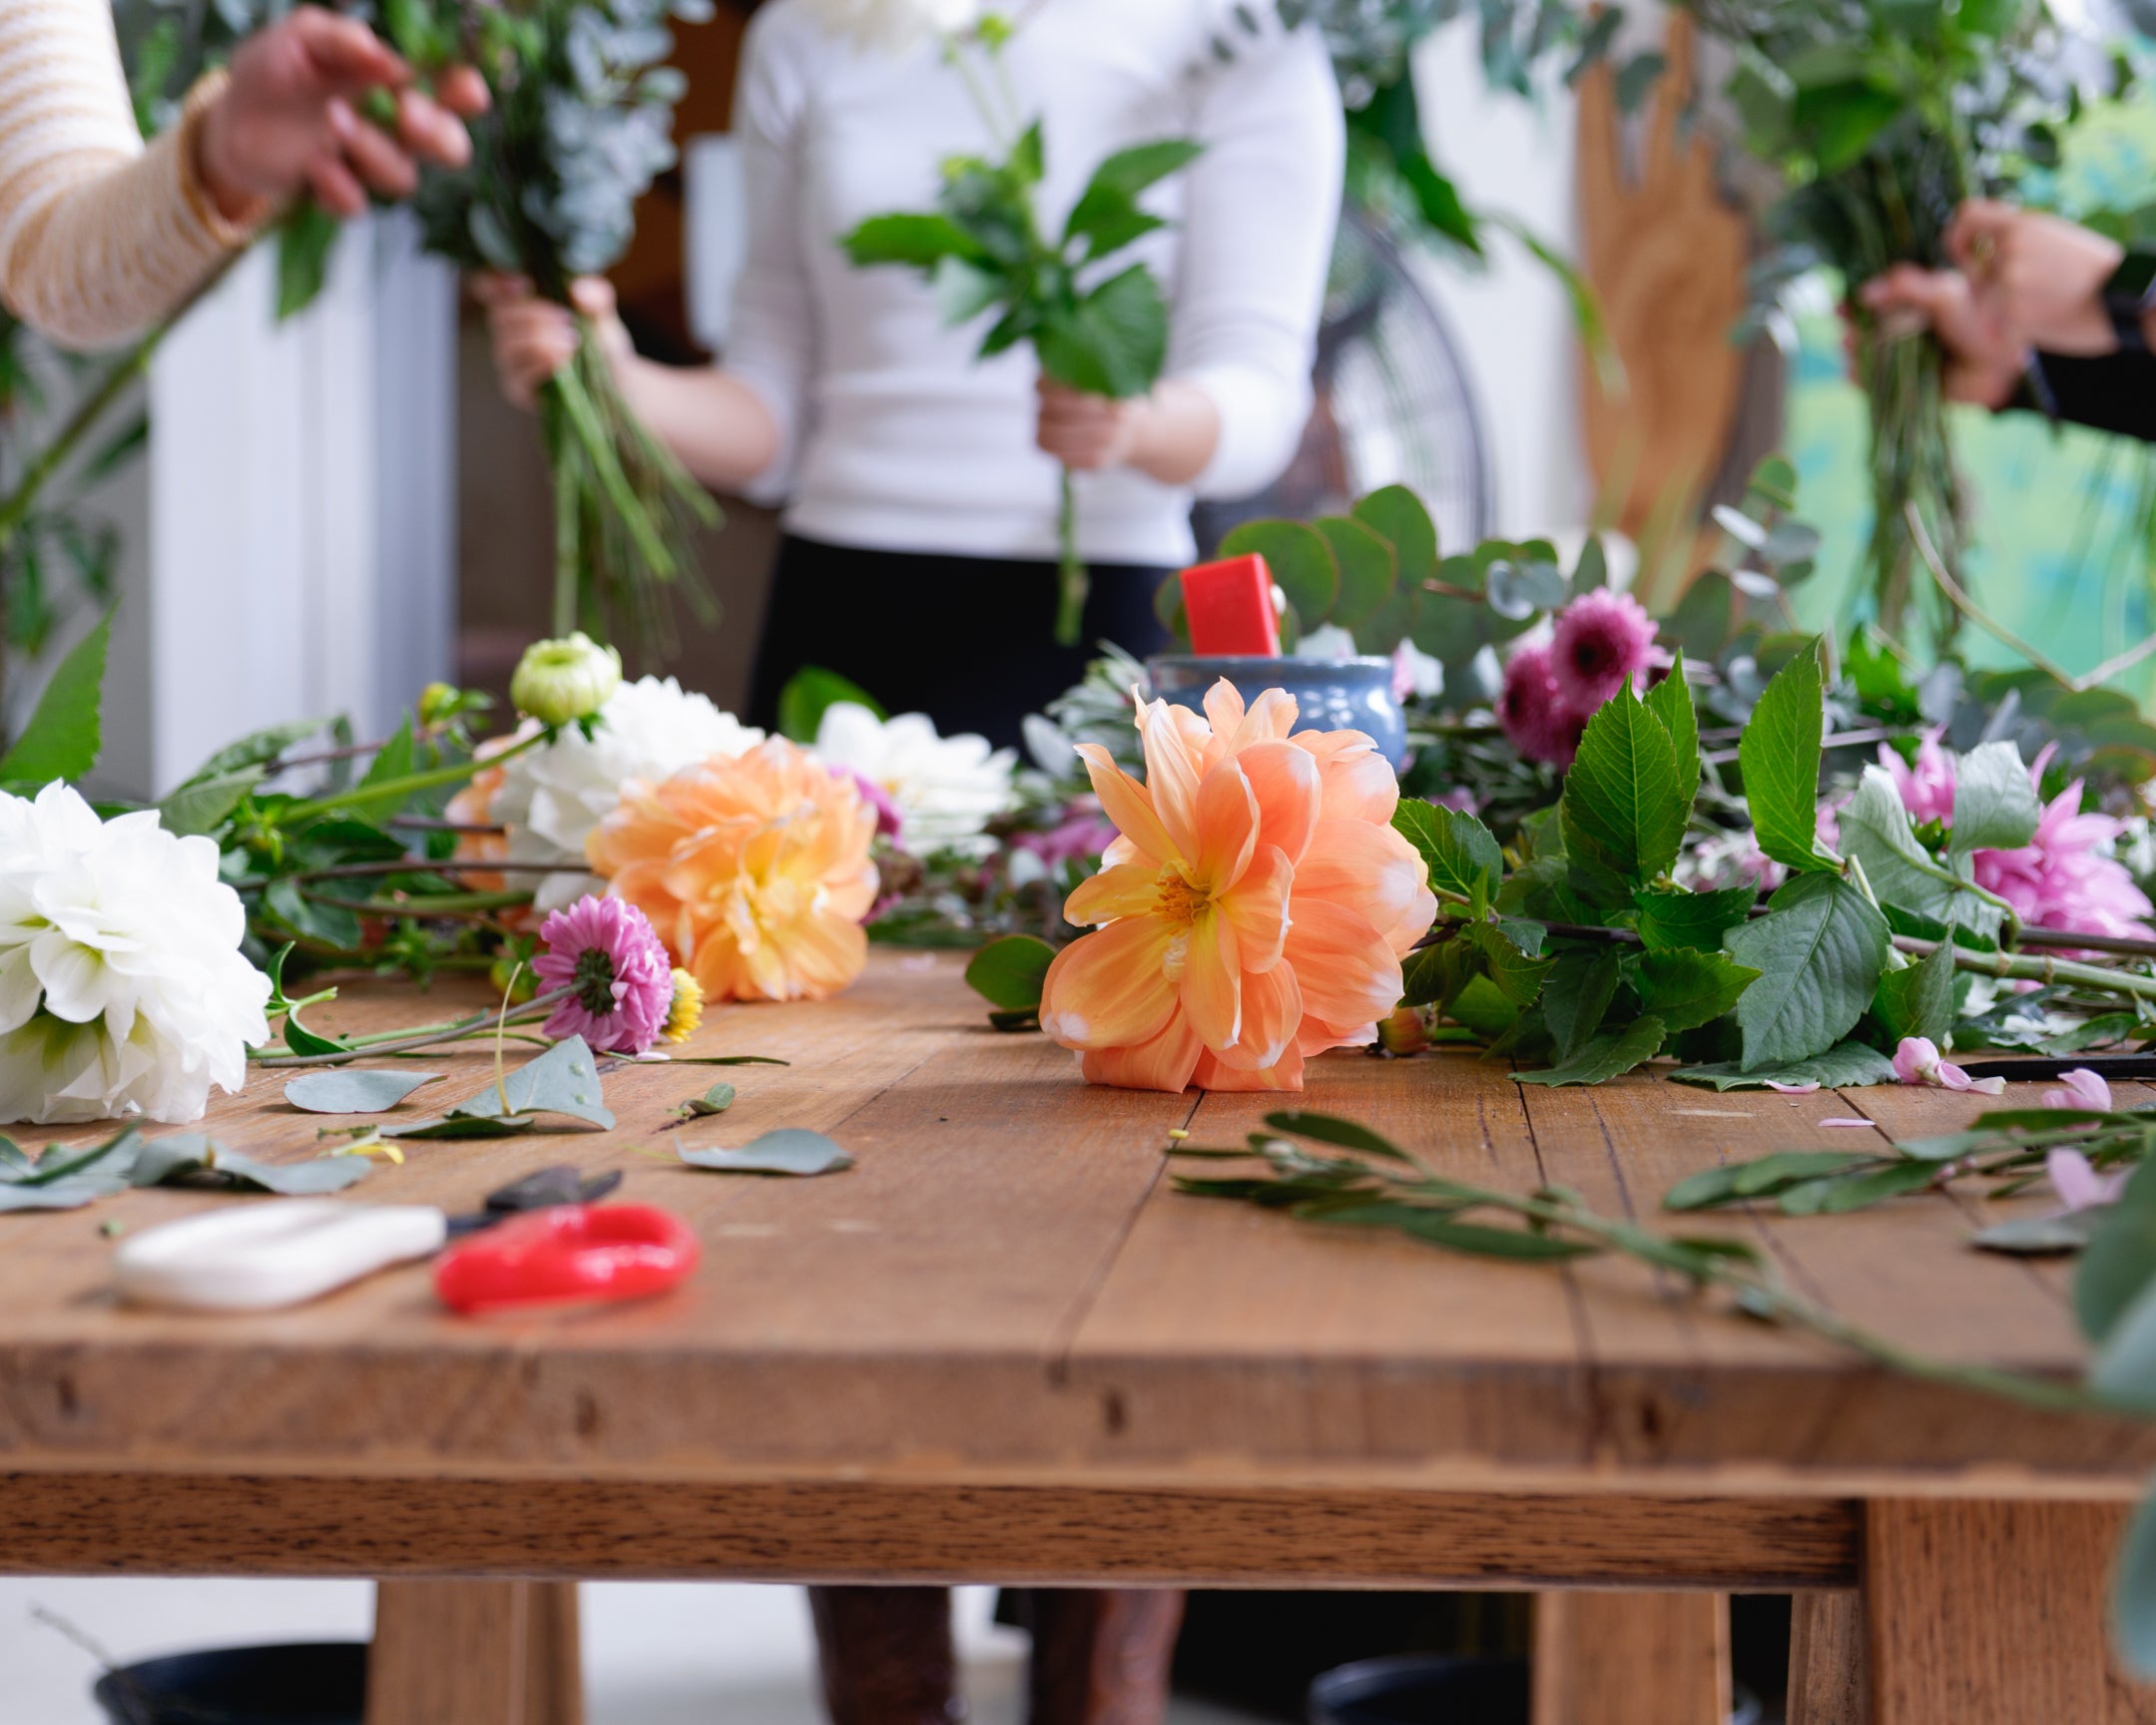 Workshop table with flowers, foliage, scissors scattered as people make flower arrangements.